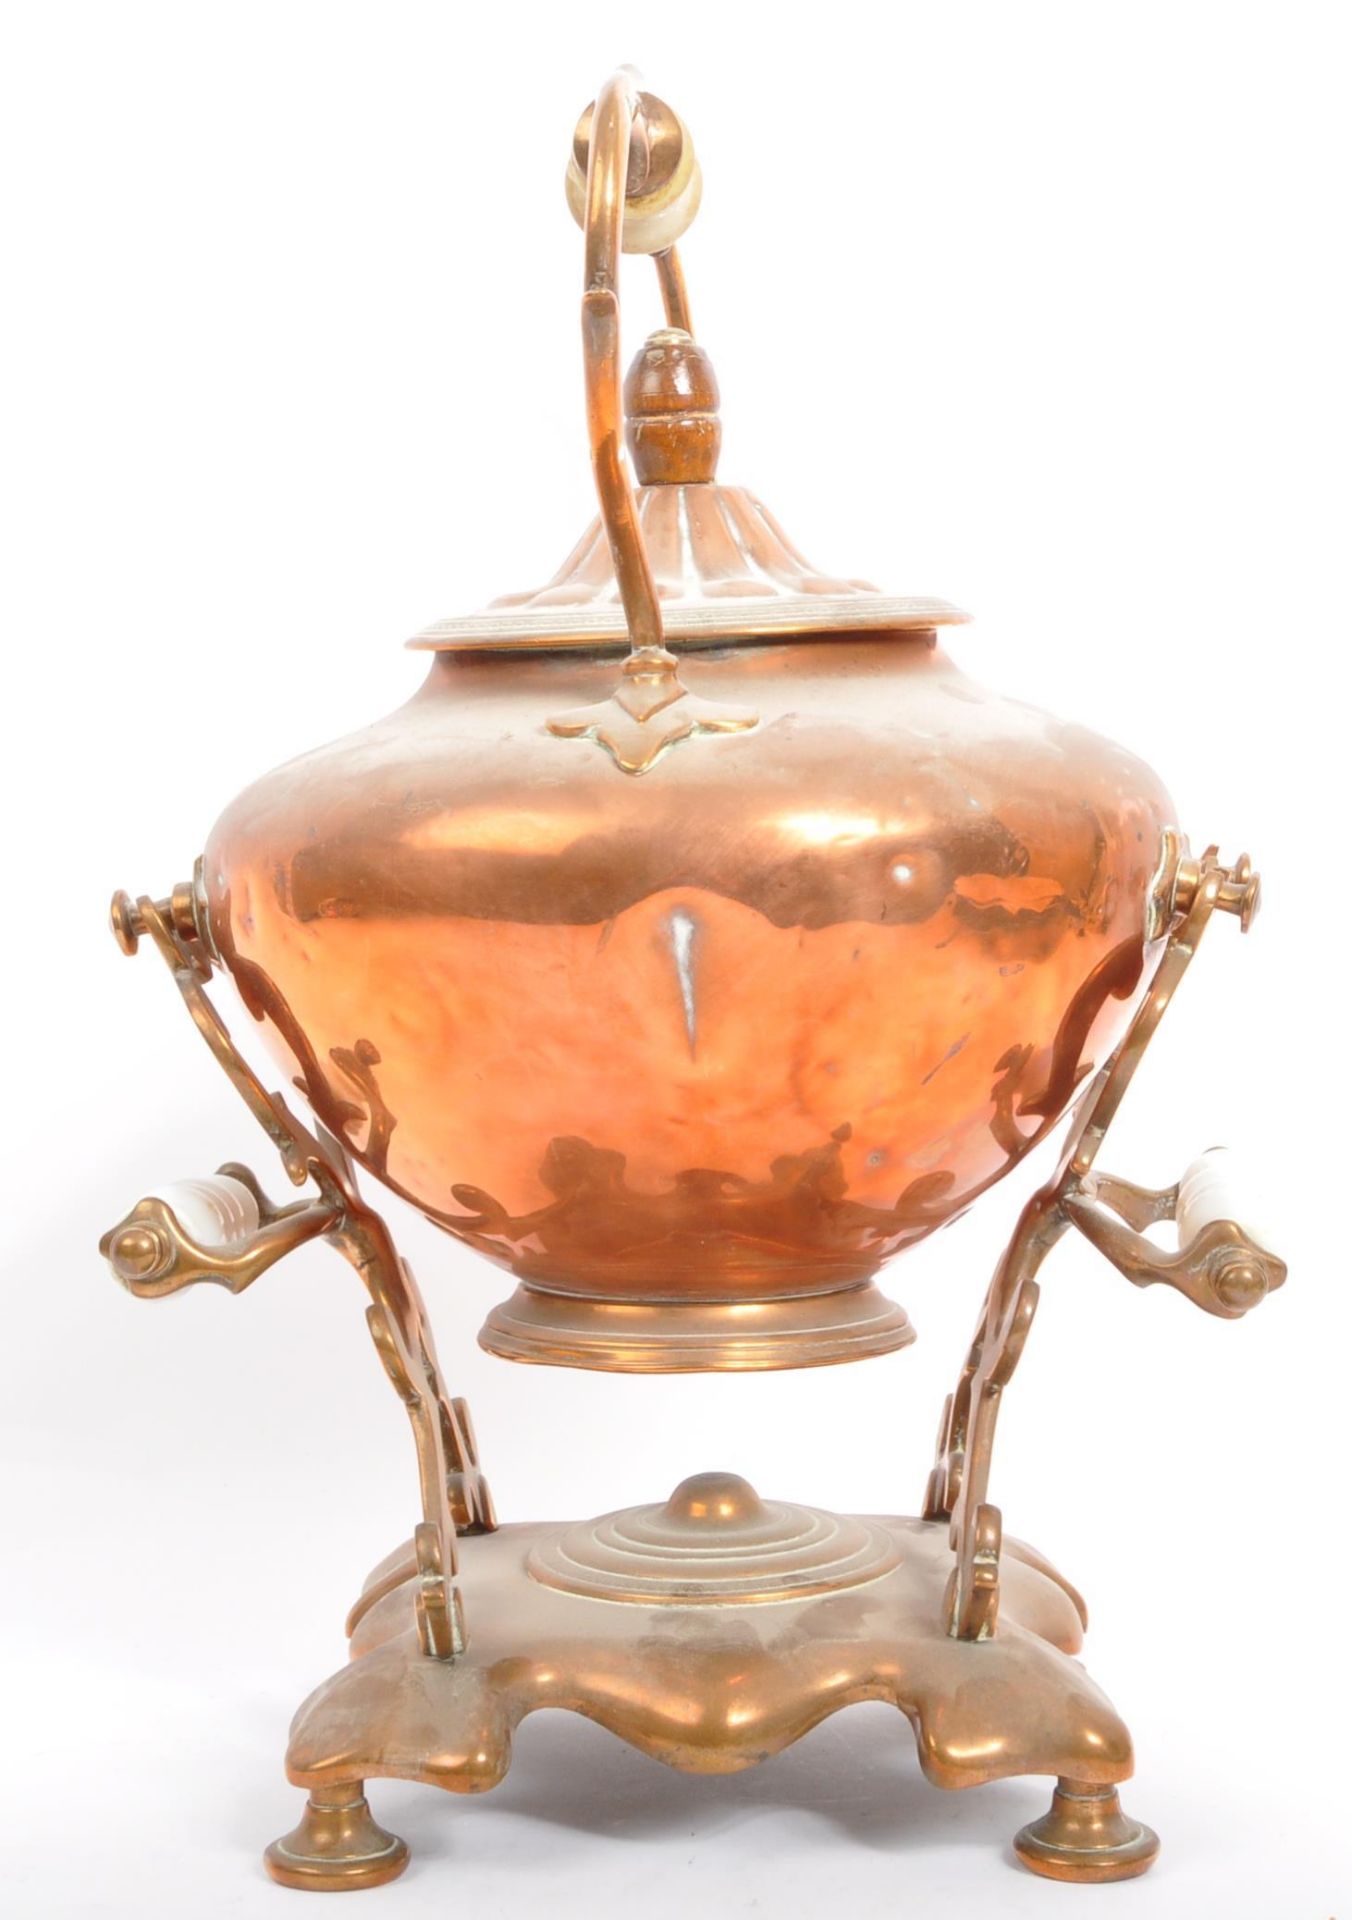 A 19TH CENTURY VICTORIAN COPPER SPIRIT KETTLE - Image 4 of 6